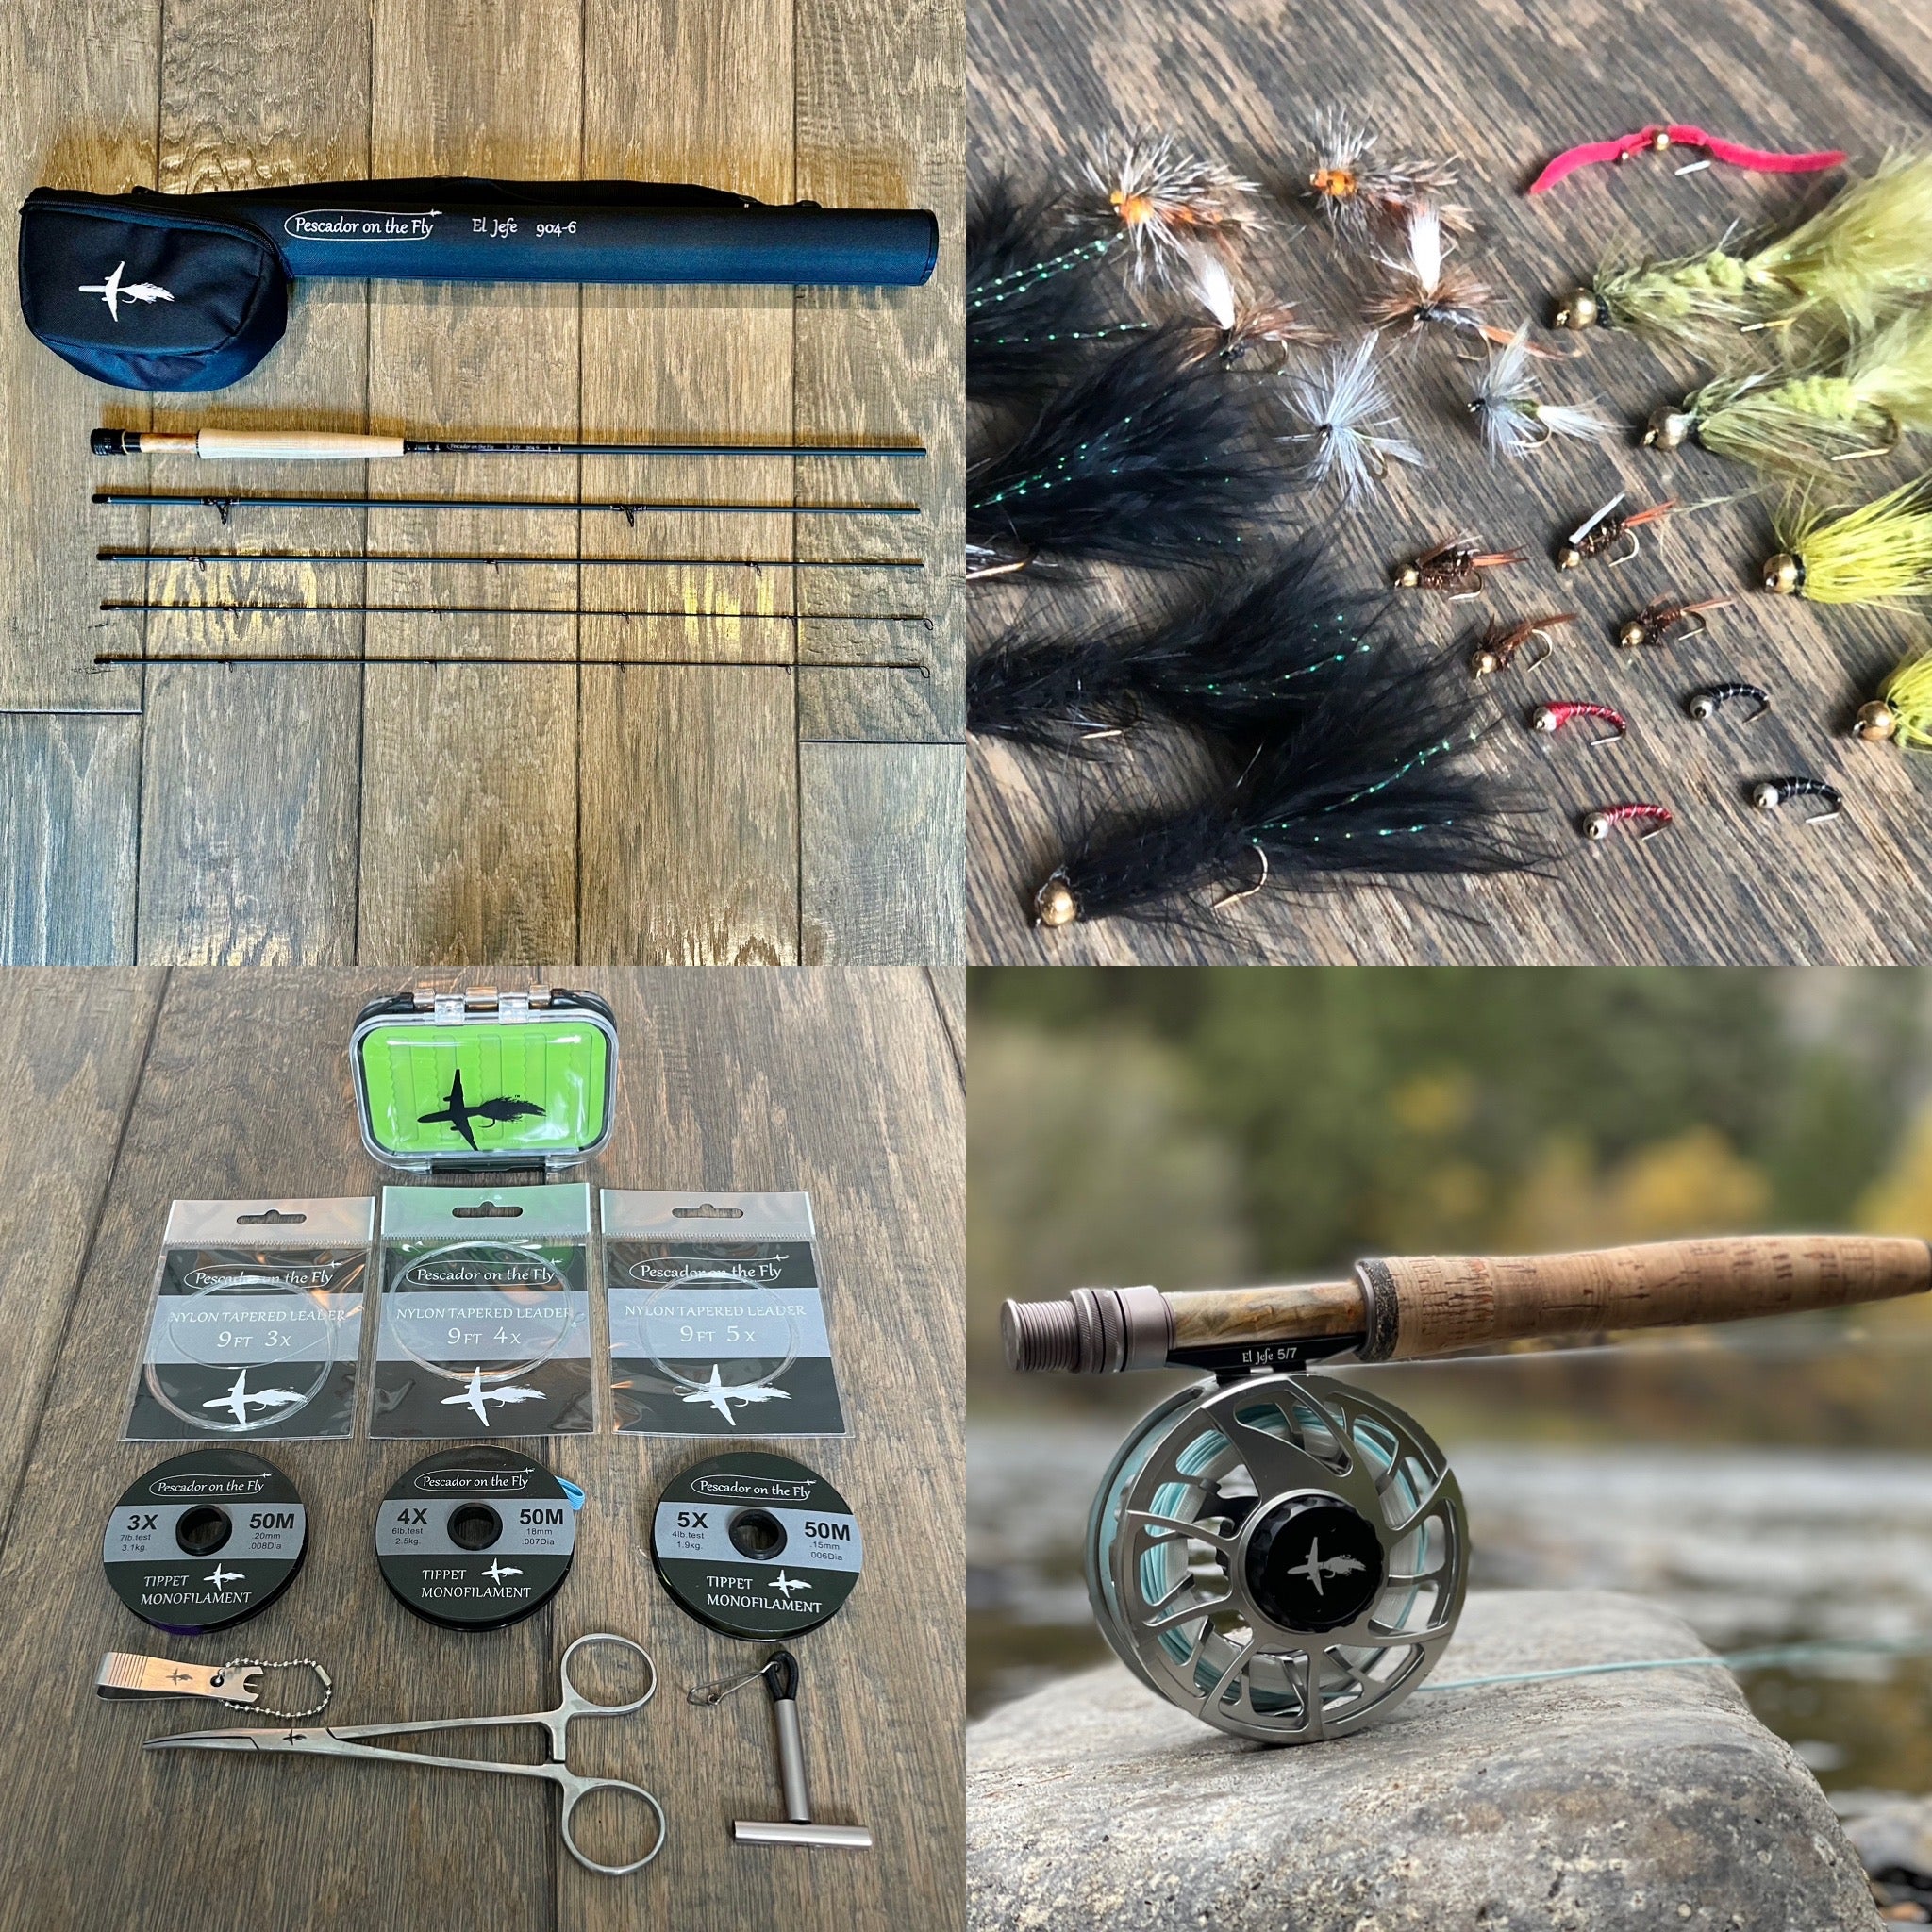 El Jefe Fly Fishing Combo Package | 904-6 | 9' Four Section 6 Weight Fly Rod And Reel Outfit